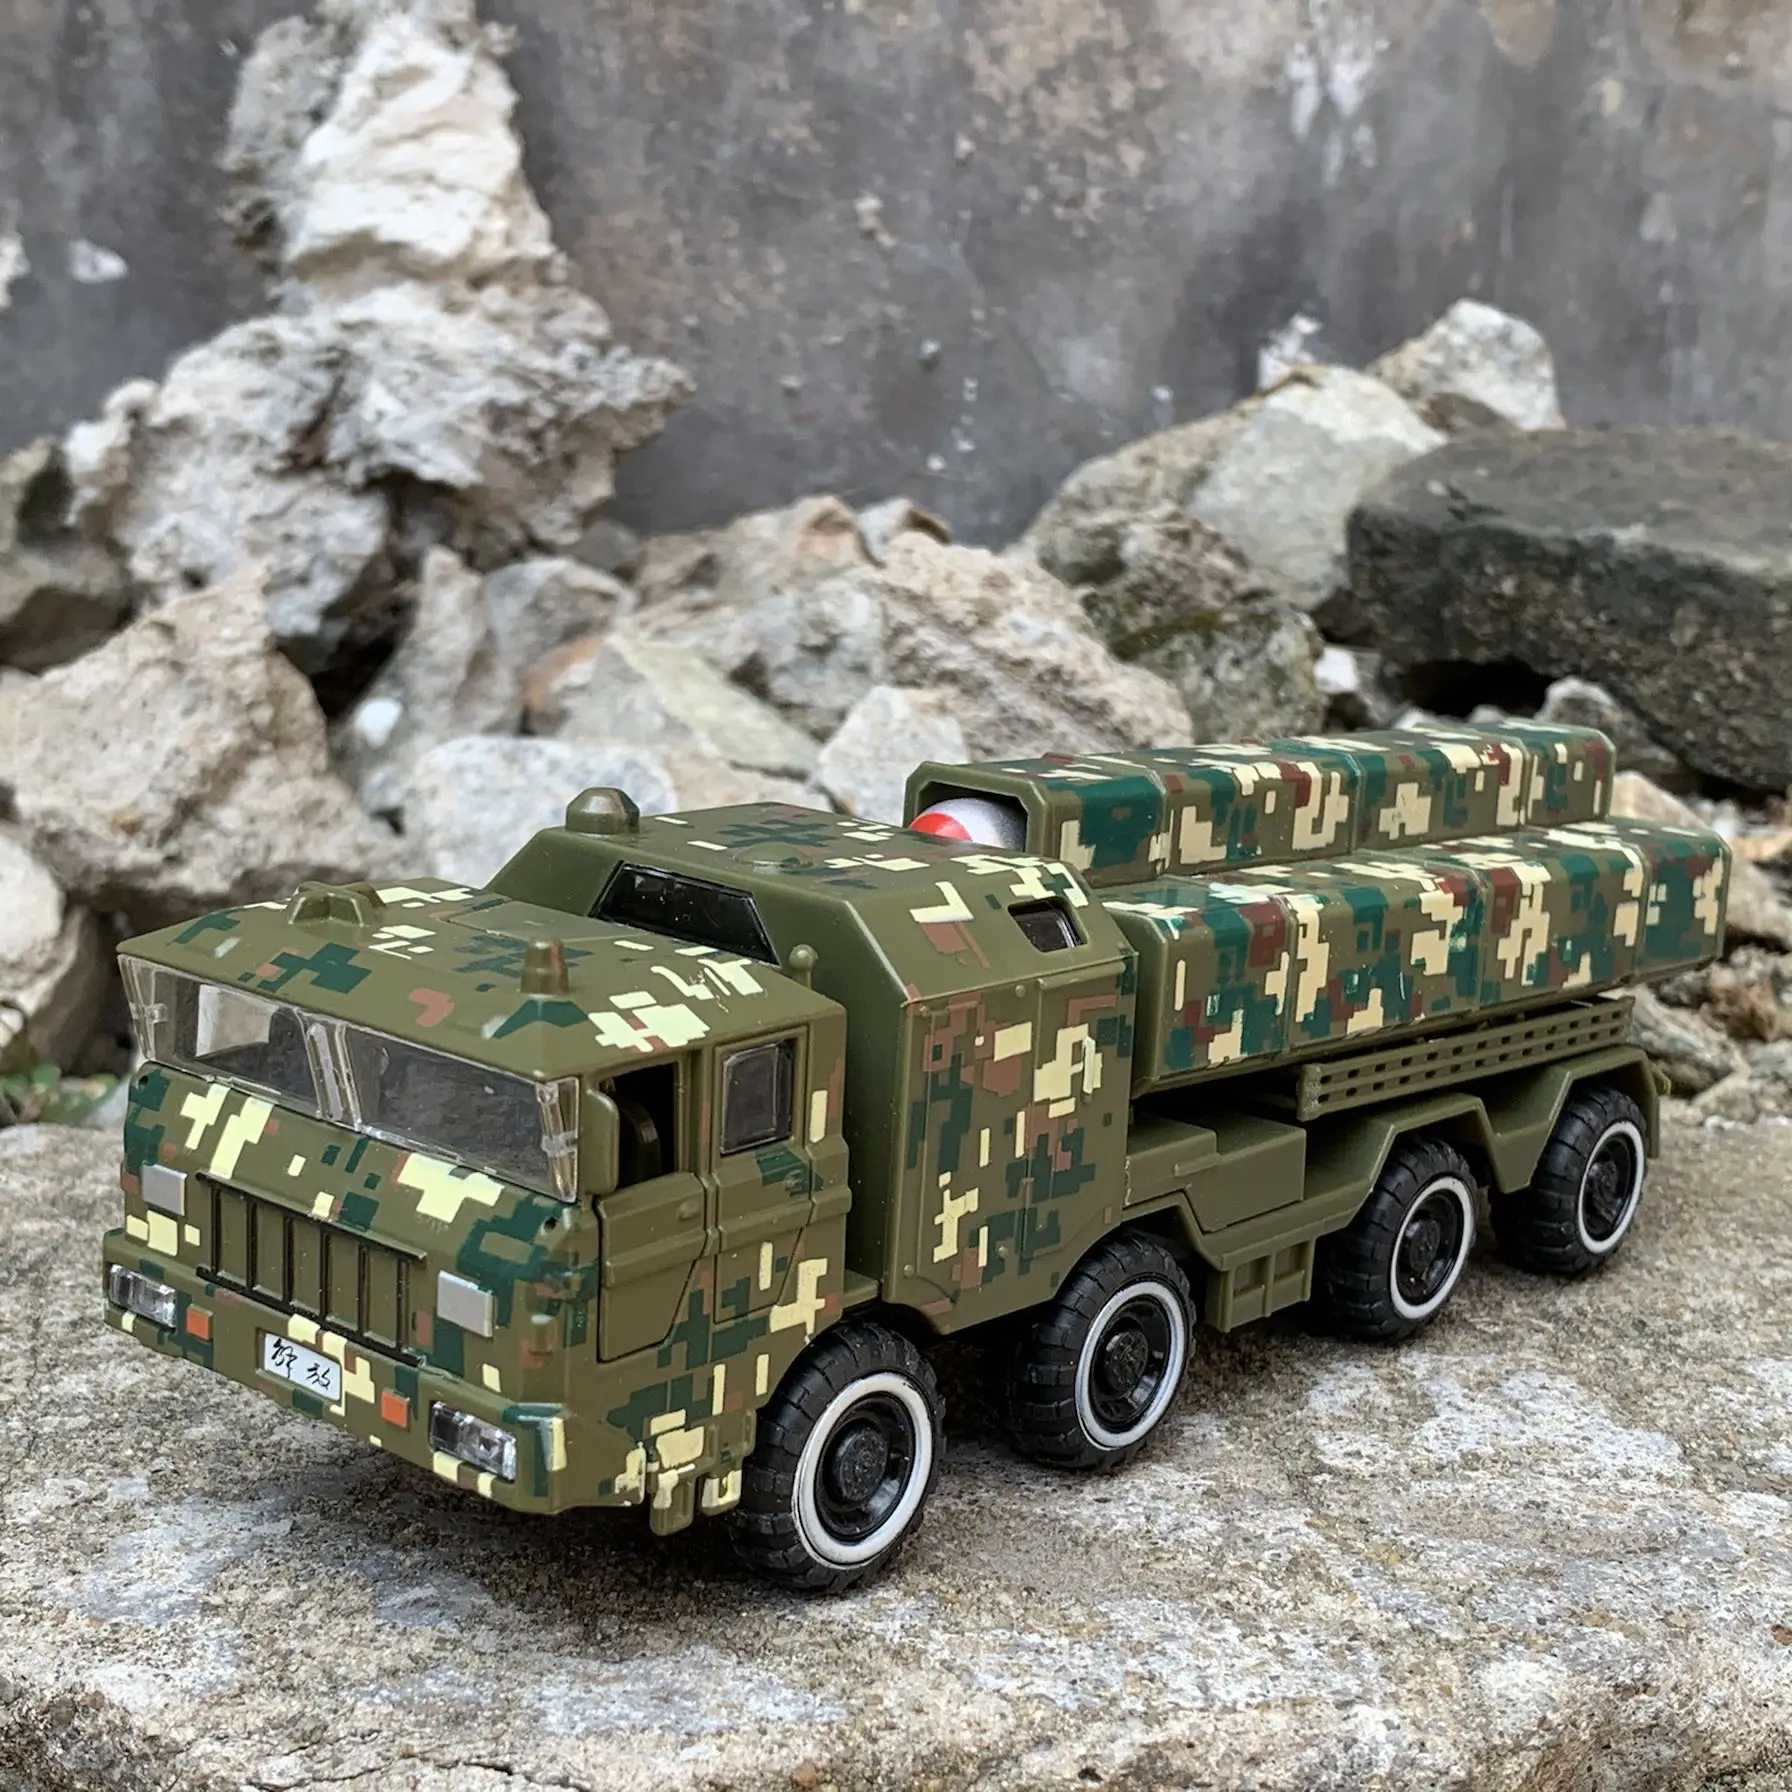 

New Special Offer Die-casting Metal Dongfeng DF15 Strategic Missile Launch Vehicle Model Scene Model Decoration Toys ForChildren